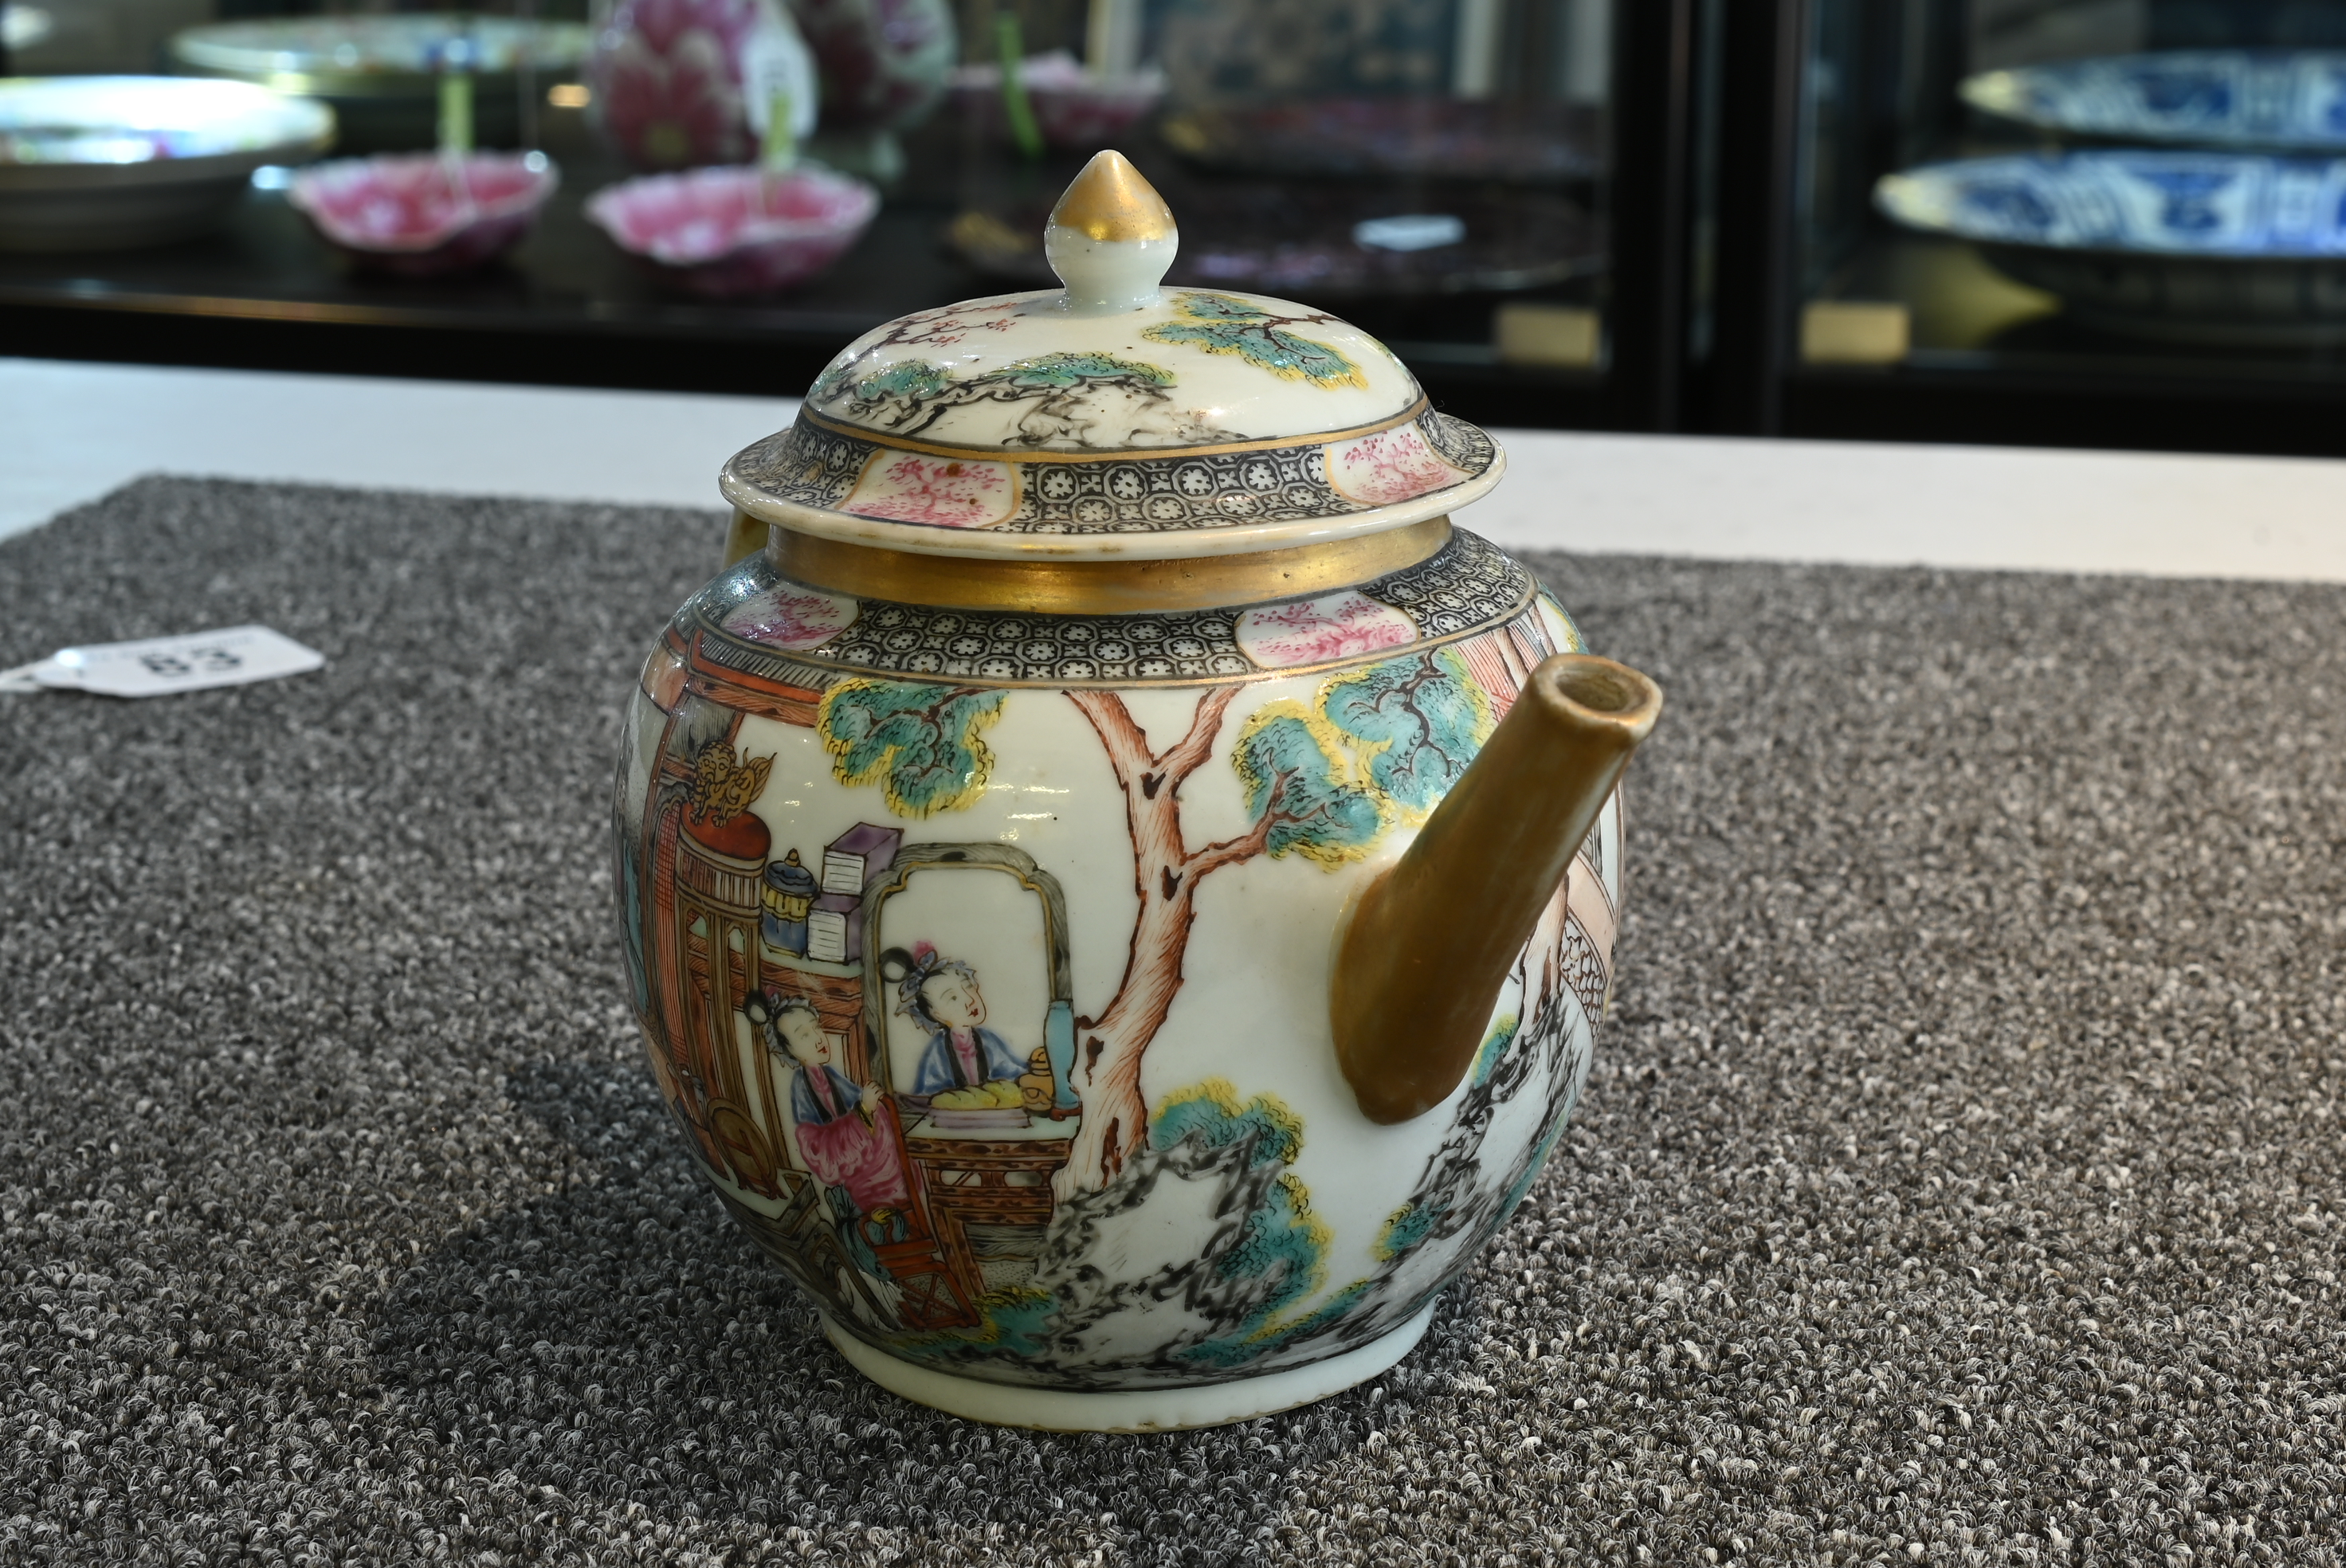 A FINE CHINESE FAMILLE ROSE PORCELAIN TEAPOT, 18TH CENTURY - Image 12 of 21